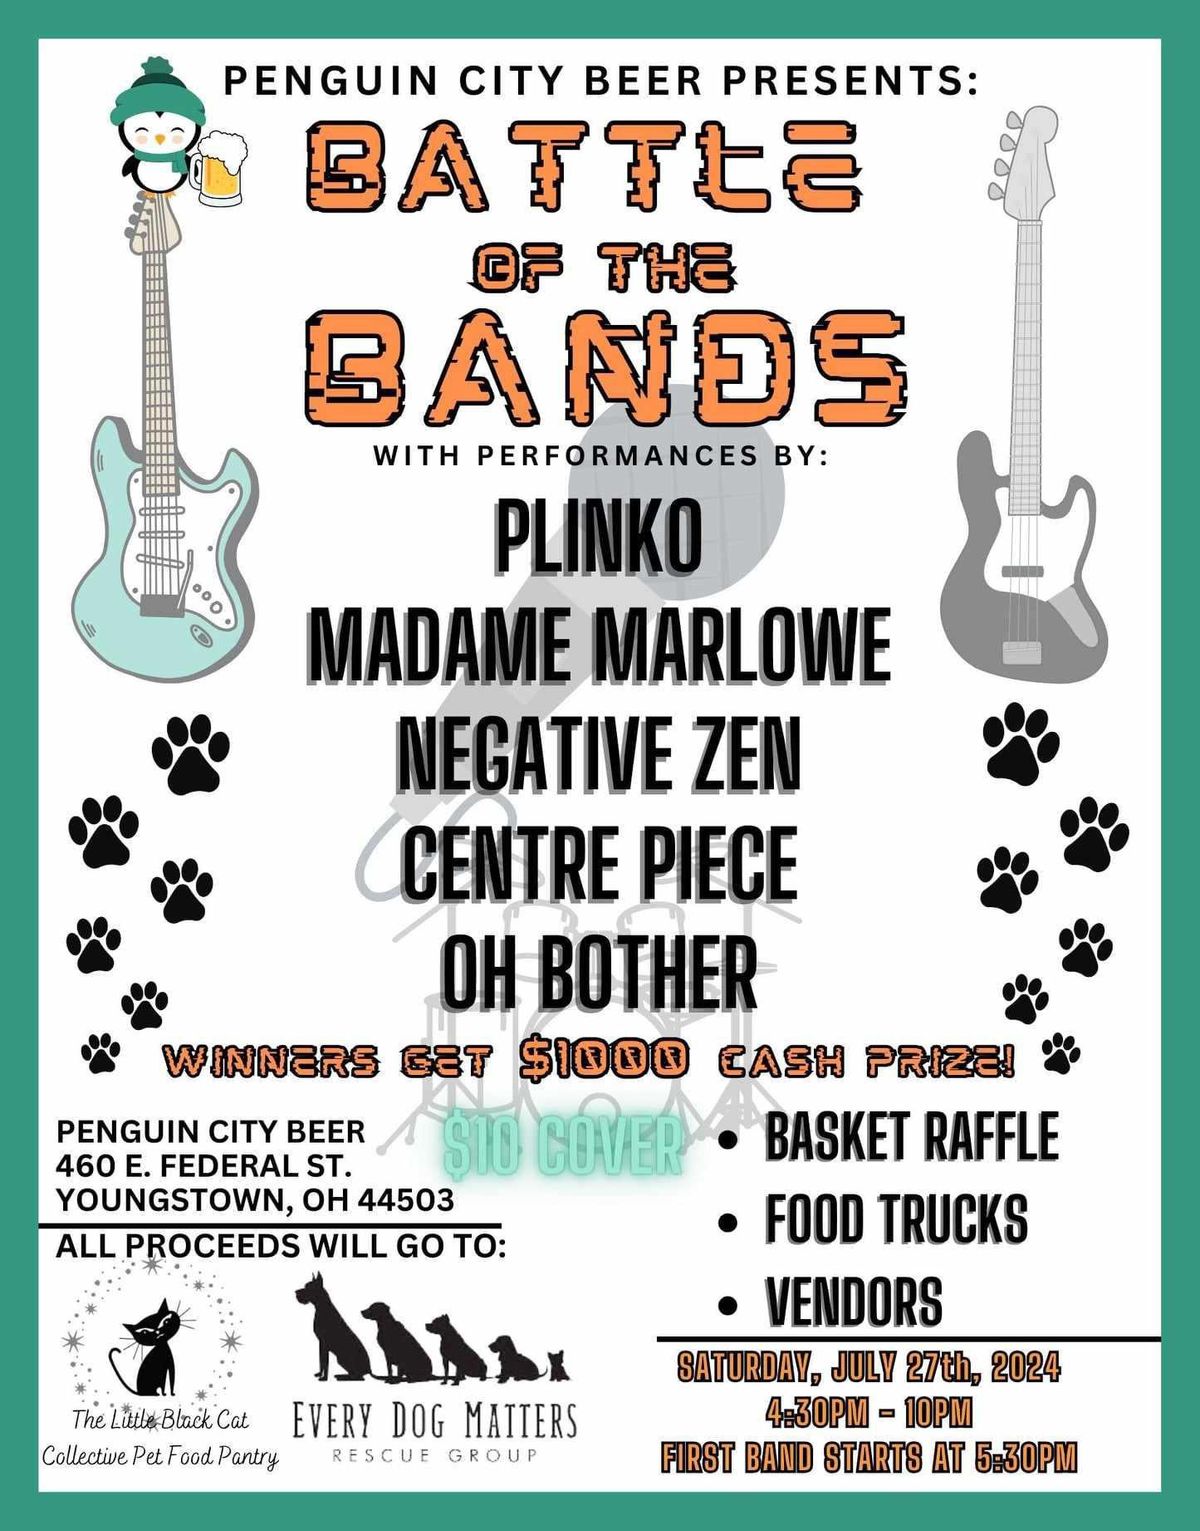 Battle of the Bands- benefitting The Little Black Cat Collective and Every Dog Matters